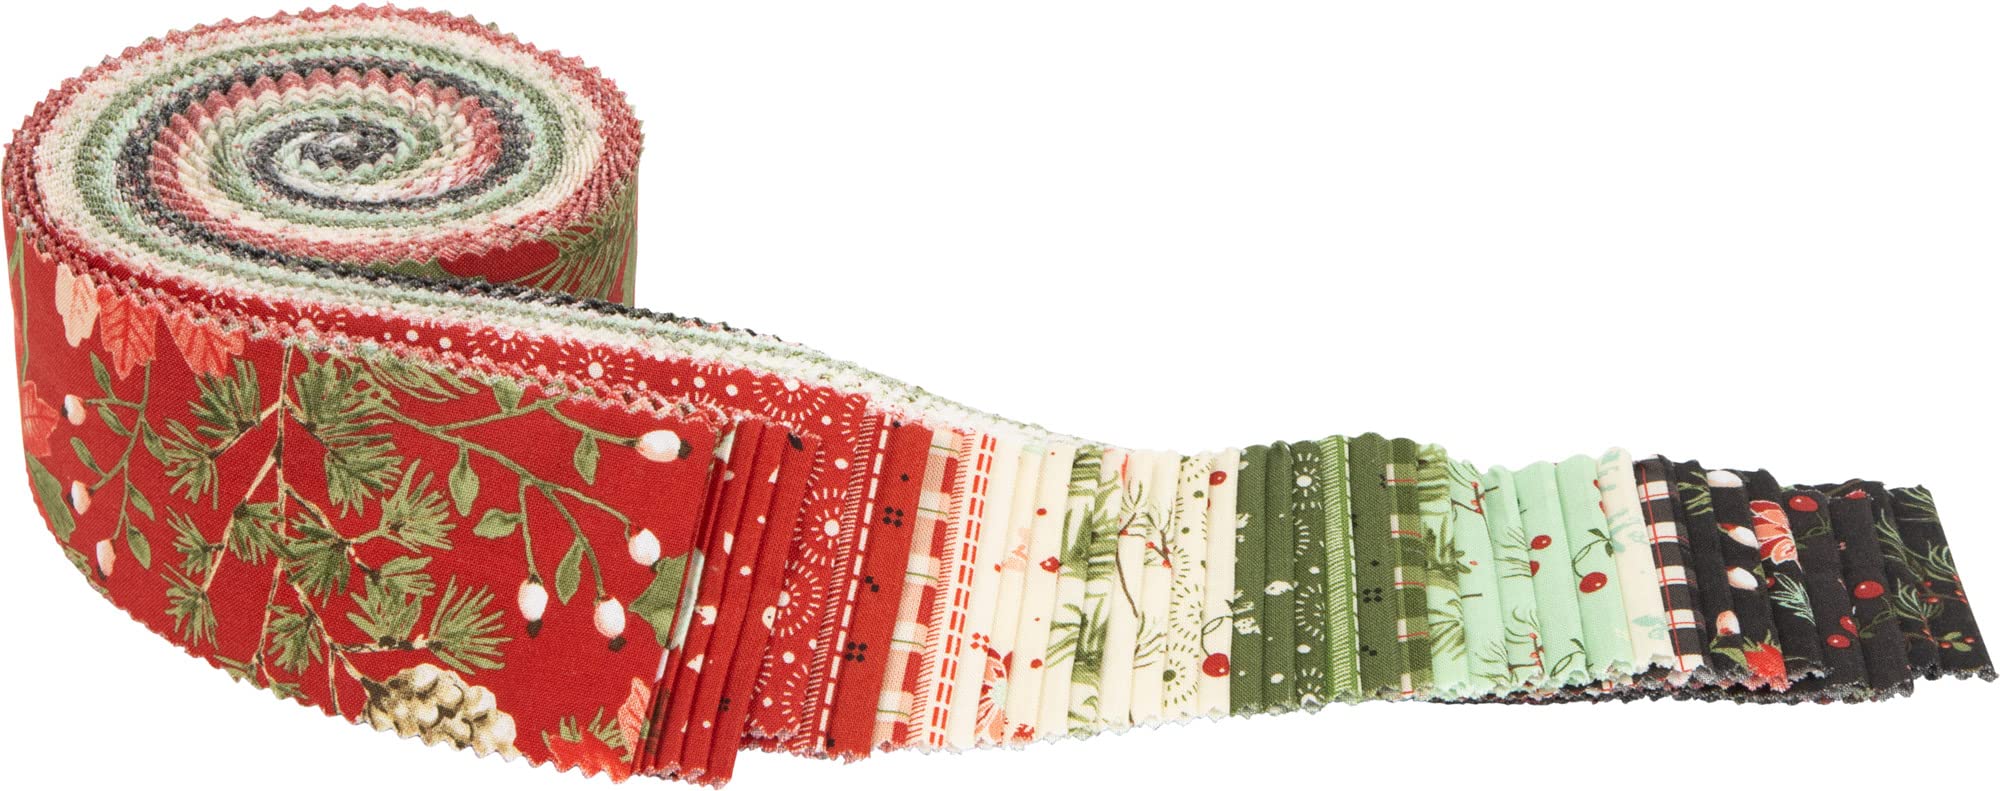 Riley Blake Designs Sandy Gervais Adel in Winter Rolie Polie 40 2.5-inch Strips Jelly Roll RP-12260-40